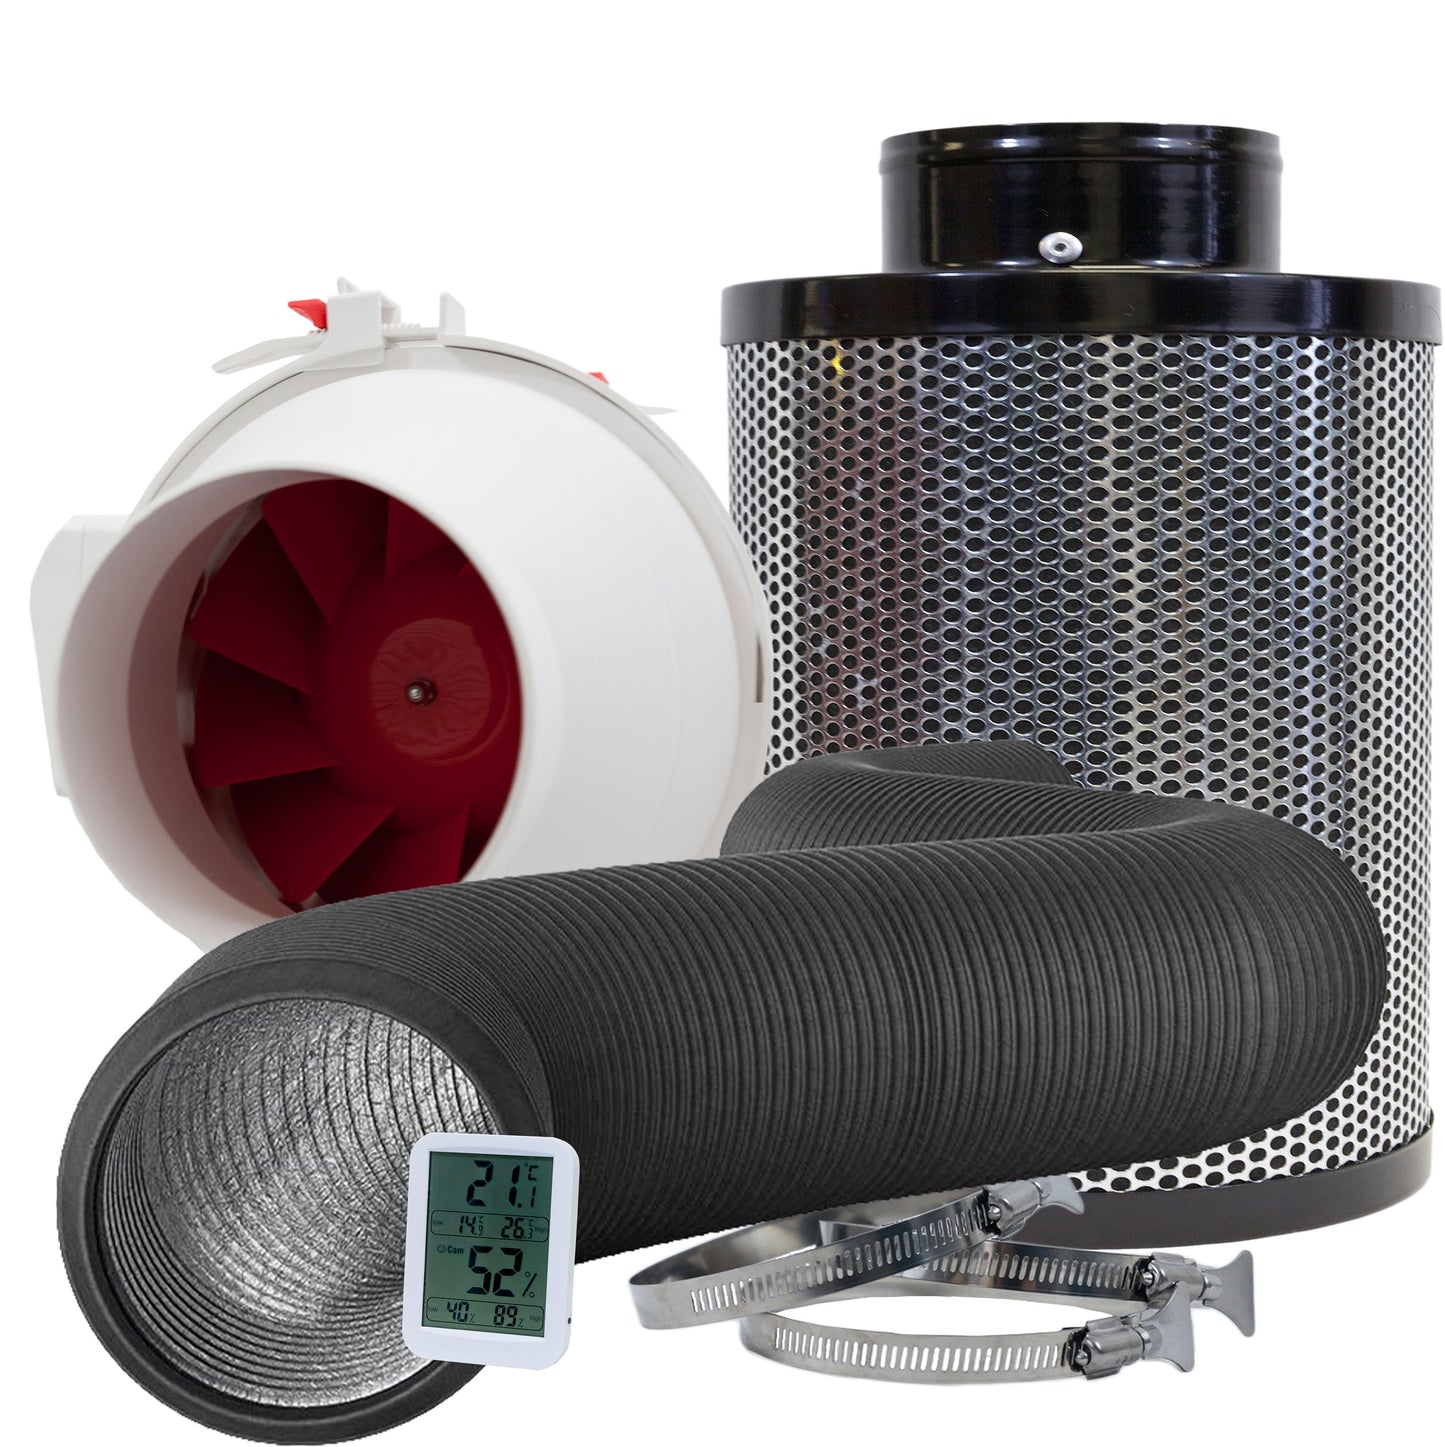 Fan & Filter Kit - 8" Inline Fan 500 CFM with 24" Activated Charcoal Carbon Filter - 24hr Timer - Ducting with Clamps